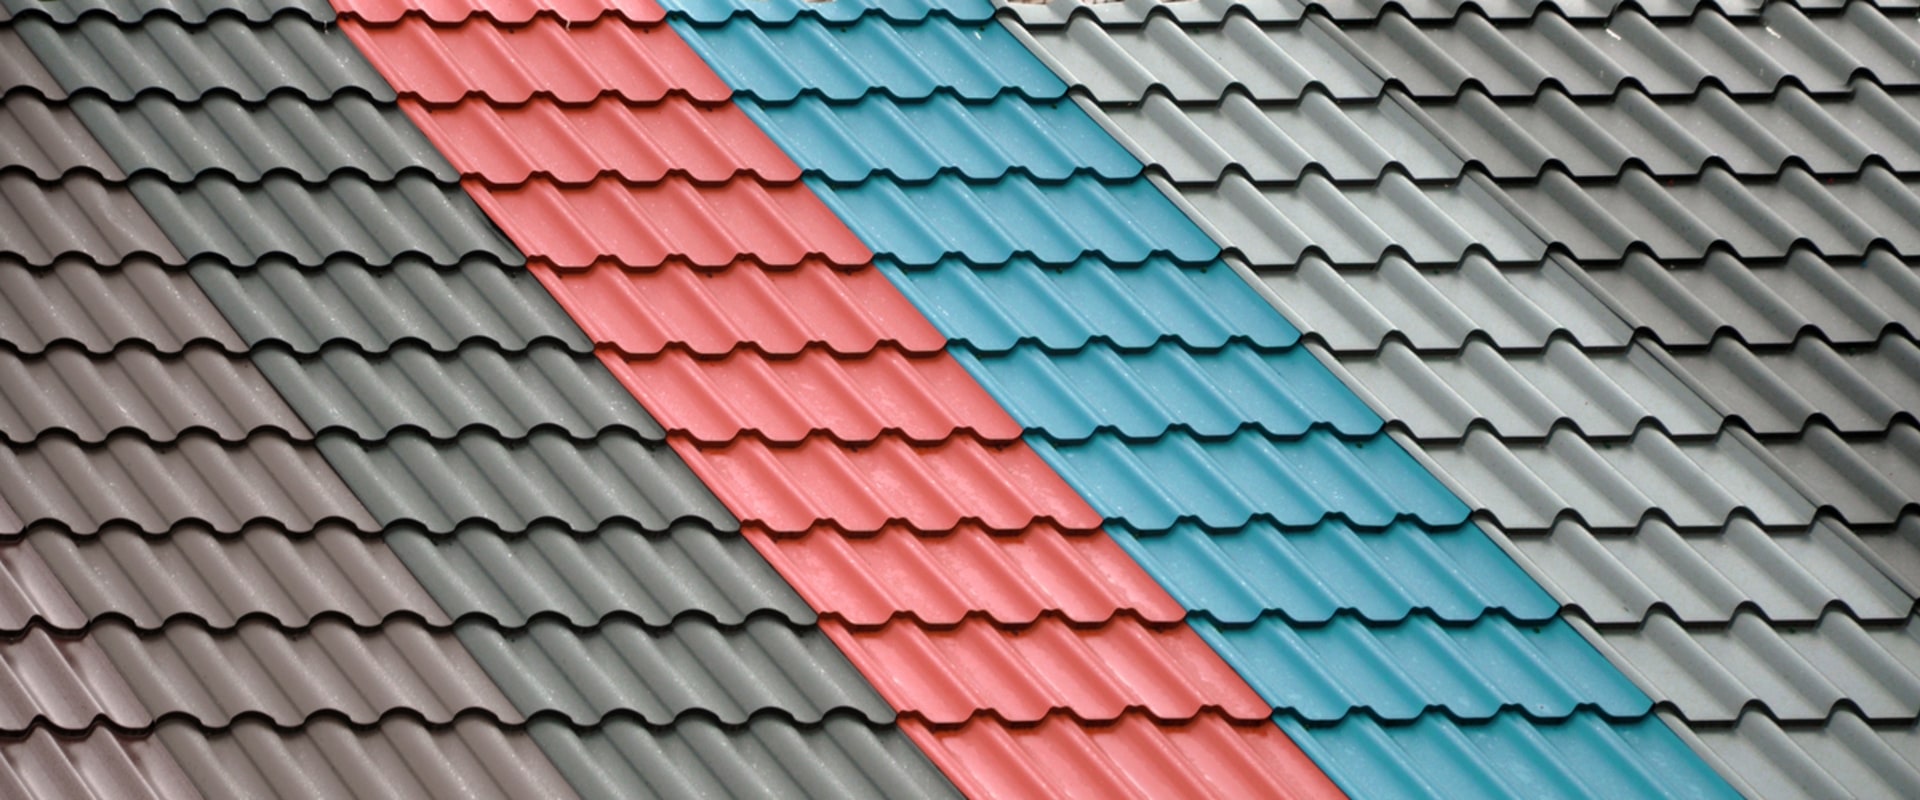 What are the longest lasting roofing shingles?